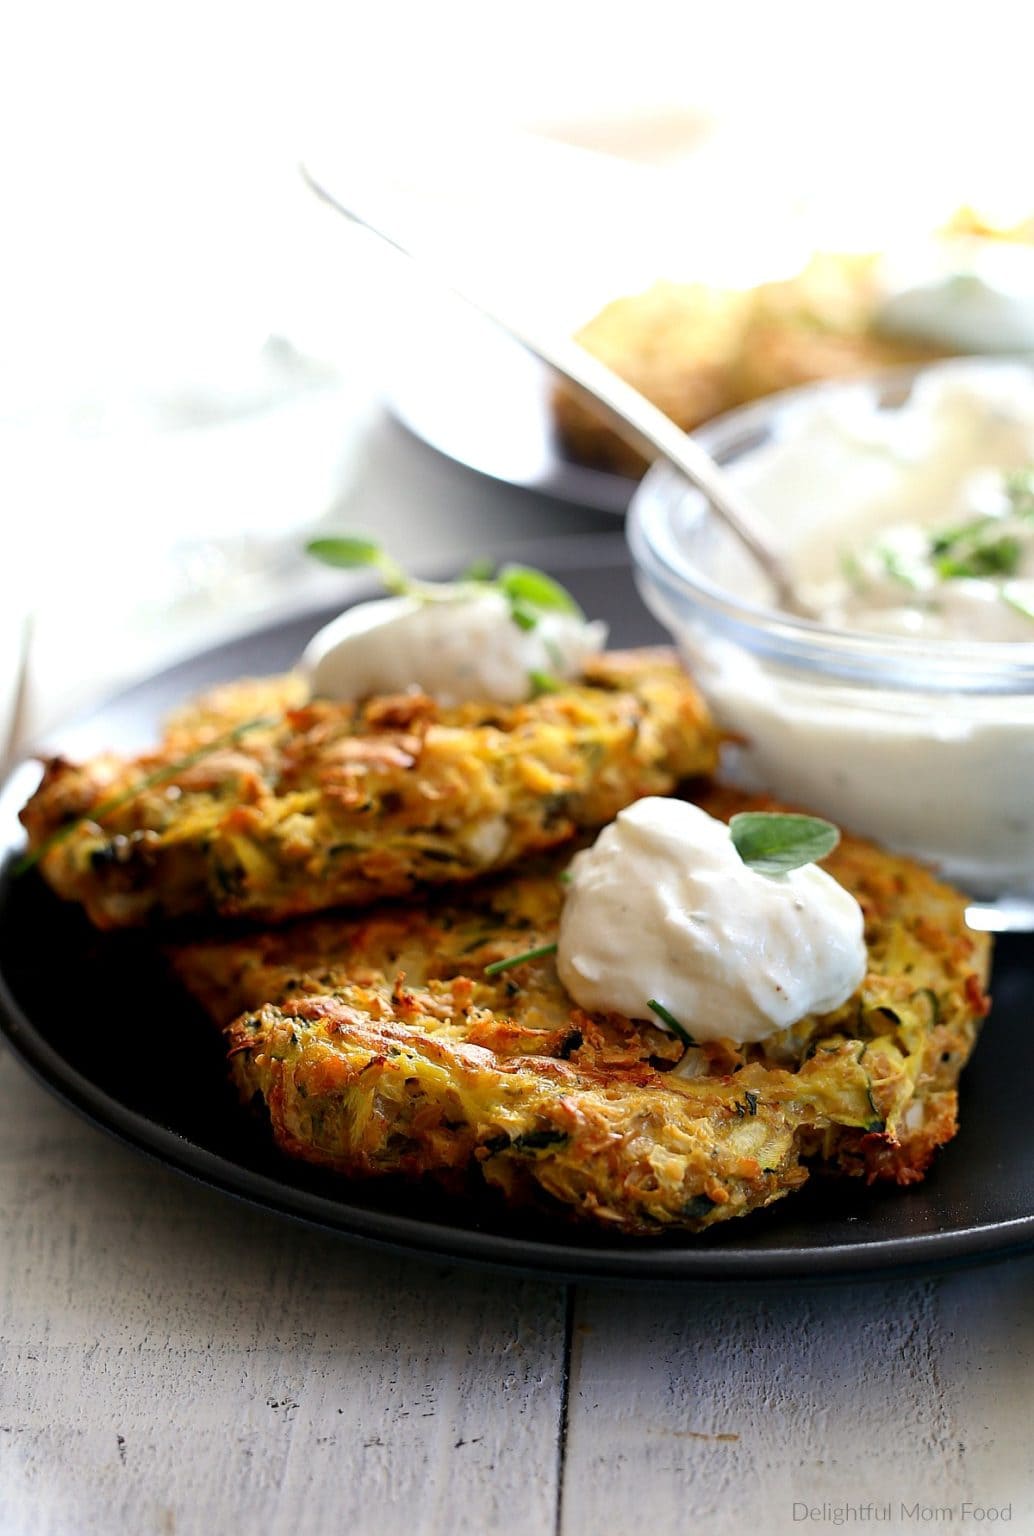 Zucchini Fritters (baked not fried!) - Delightful Mom Food